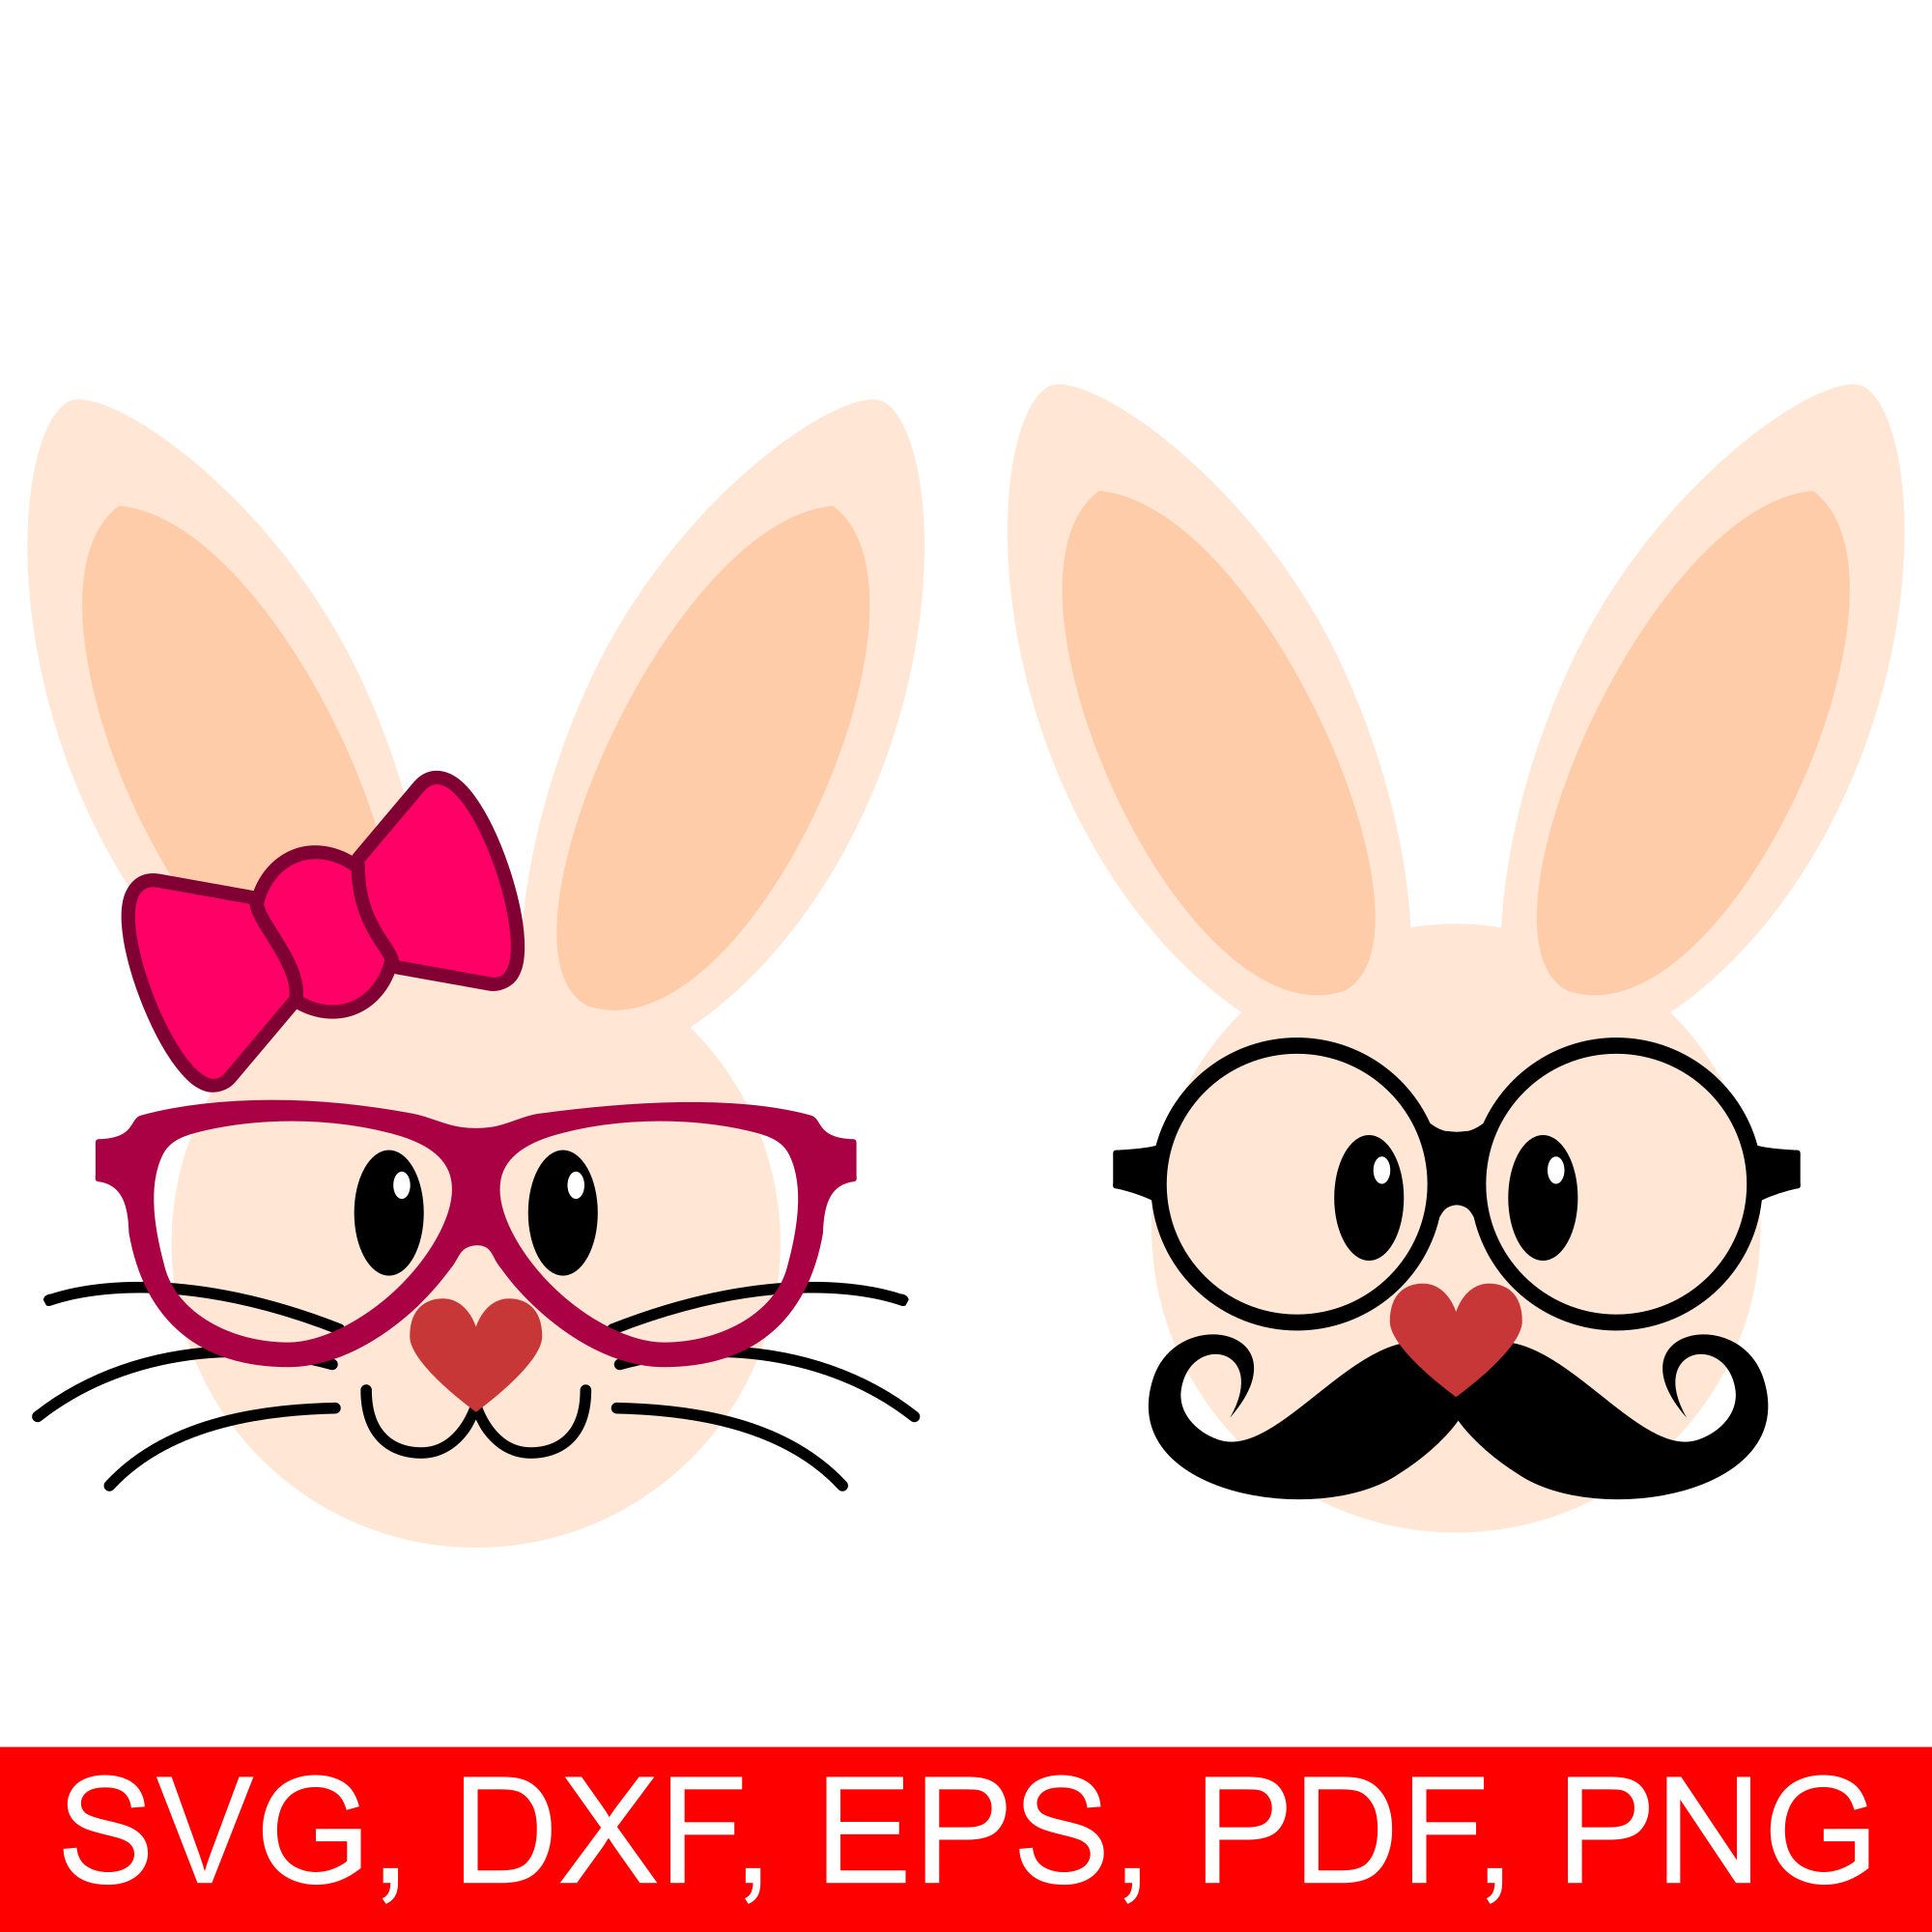 Miss and mr easter. Bunnies clipart hipster